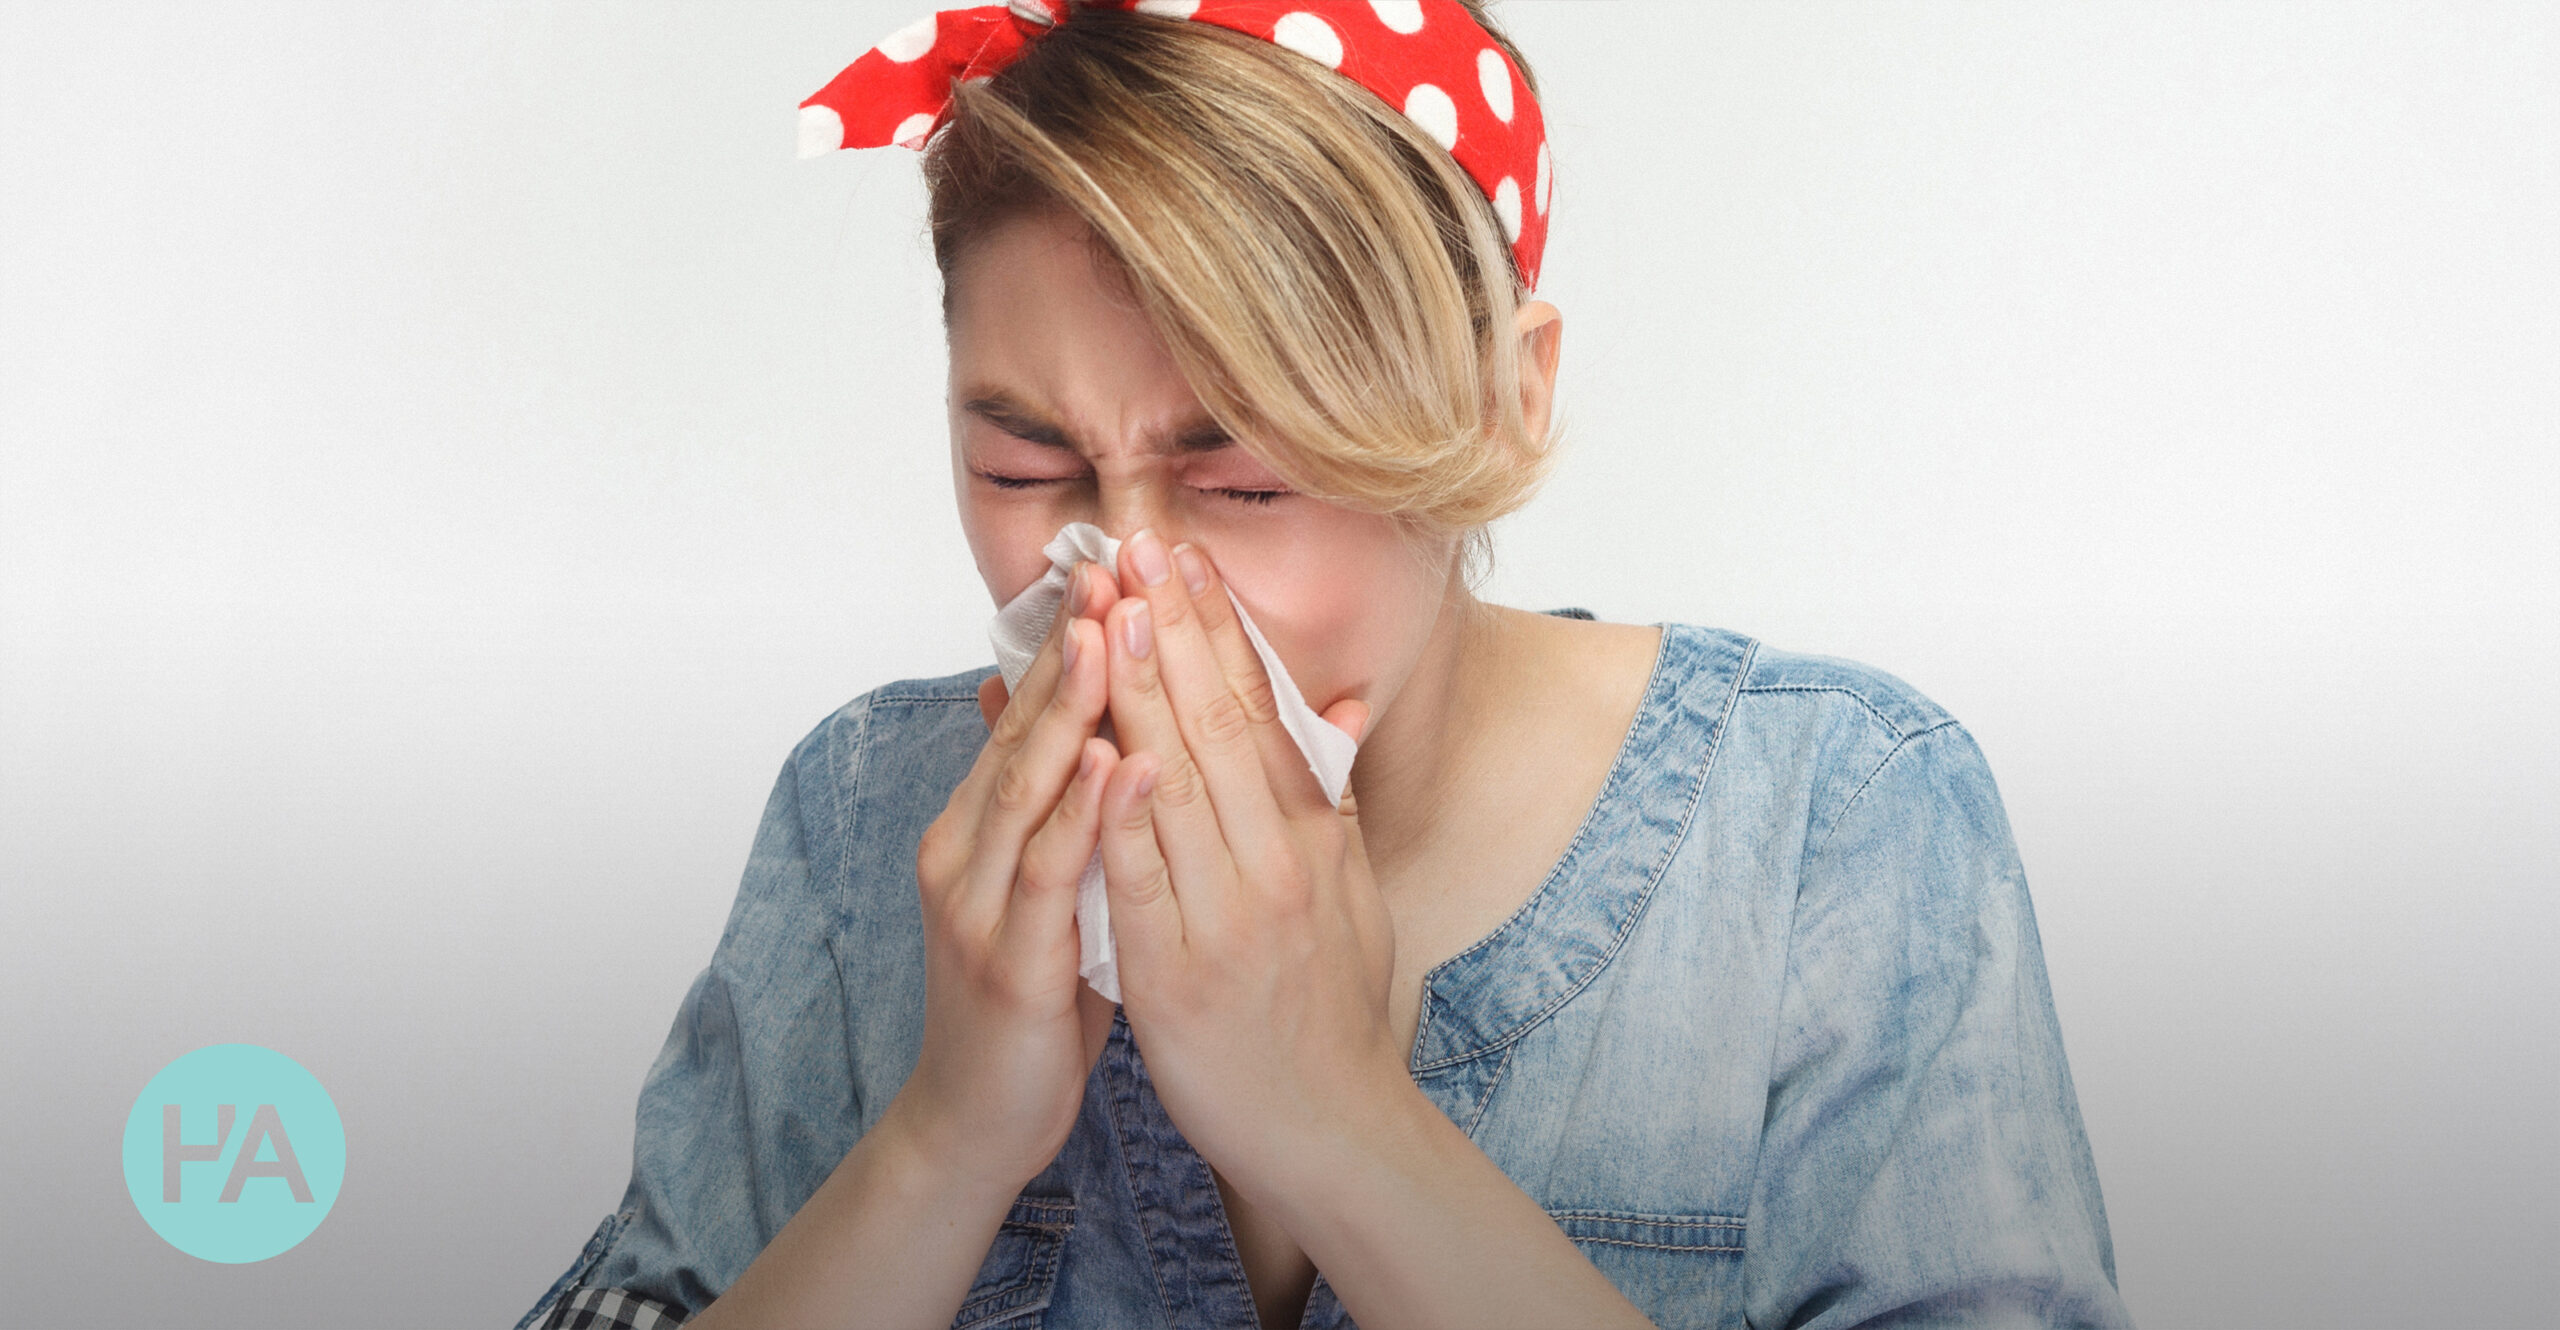 Are You Ignoring Your Allergy Symptoms?